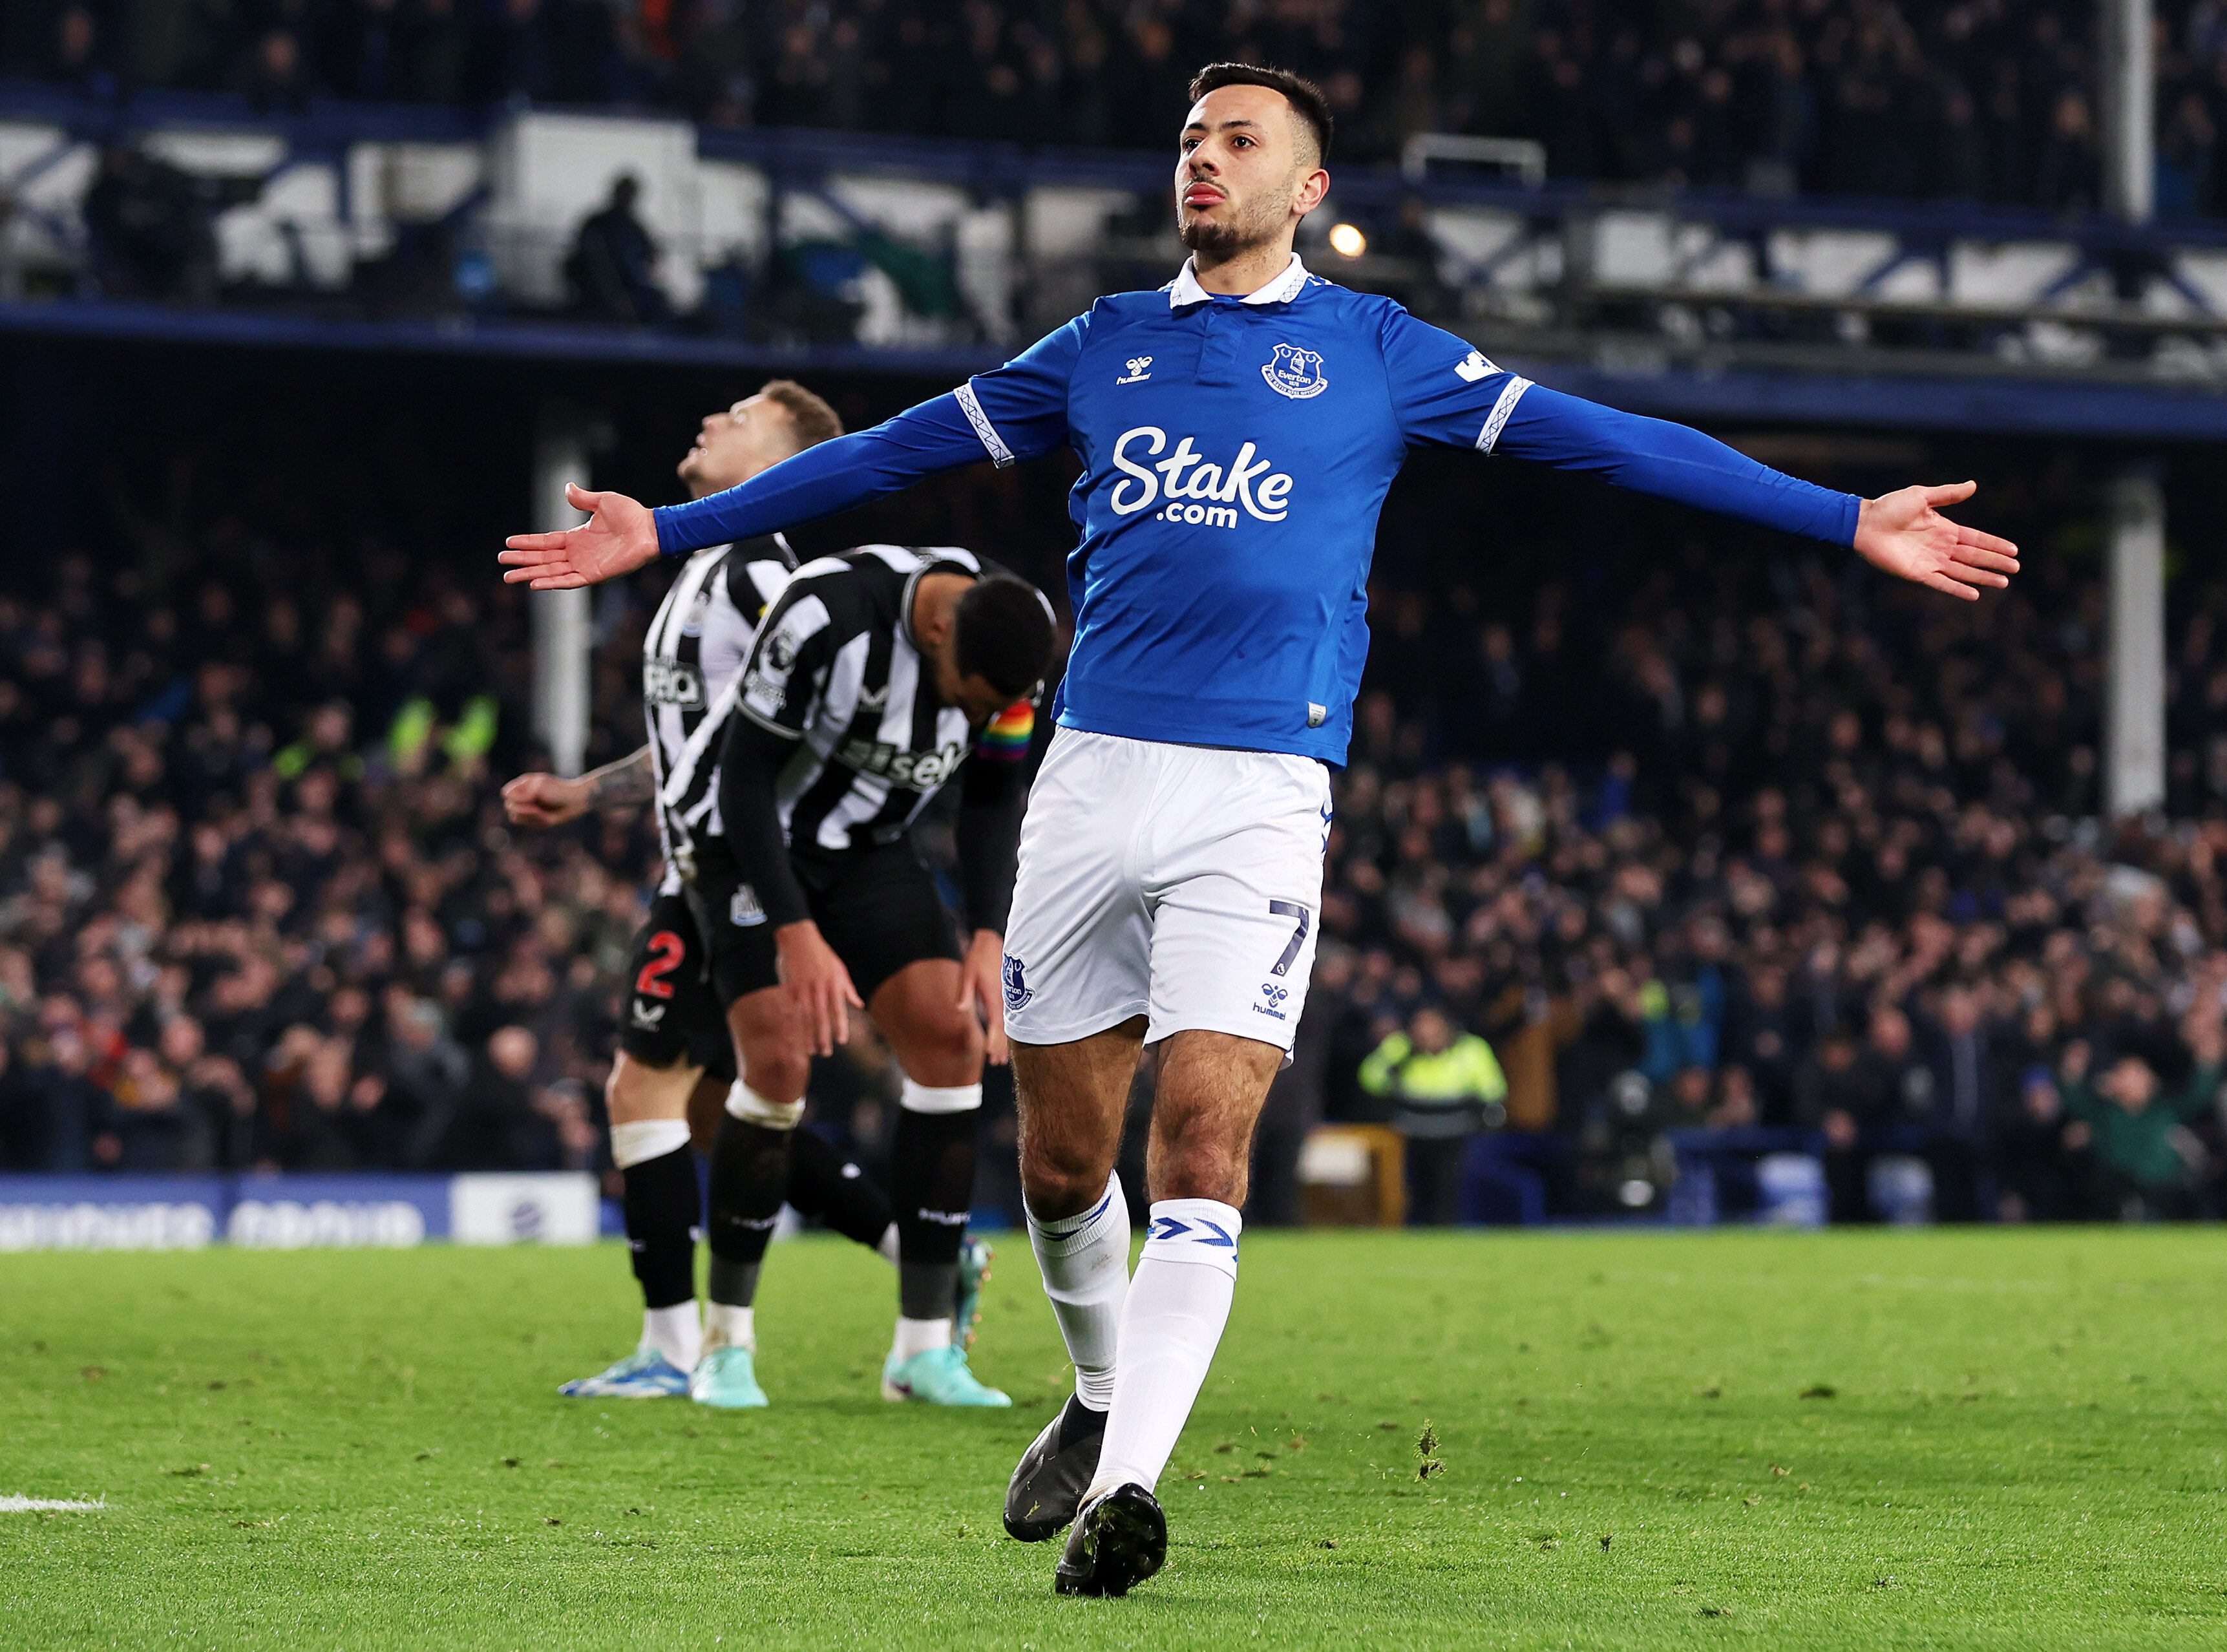 "Unstoppable..." pundit in awe of Everton midfielder's performance against Newcastle